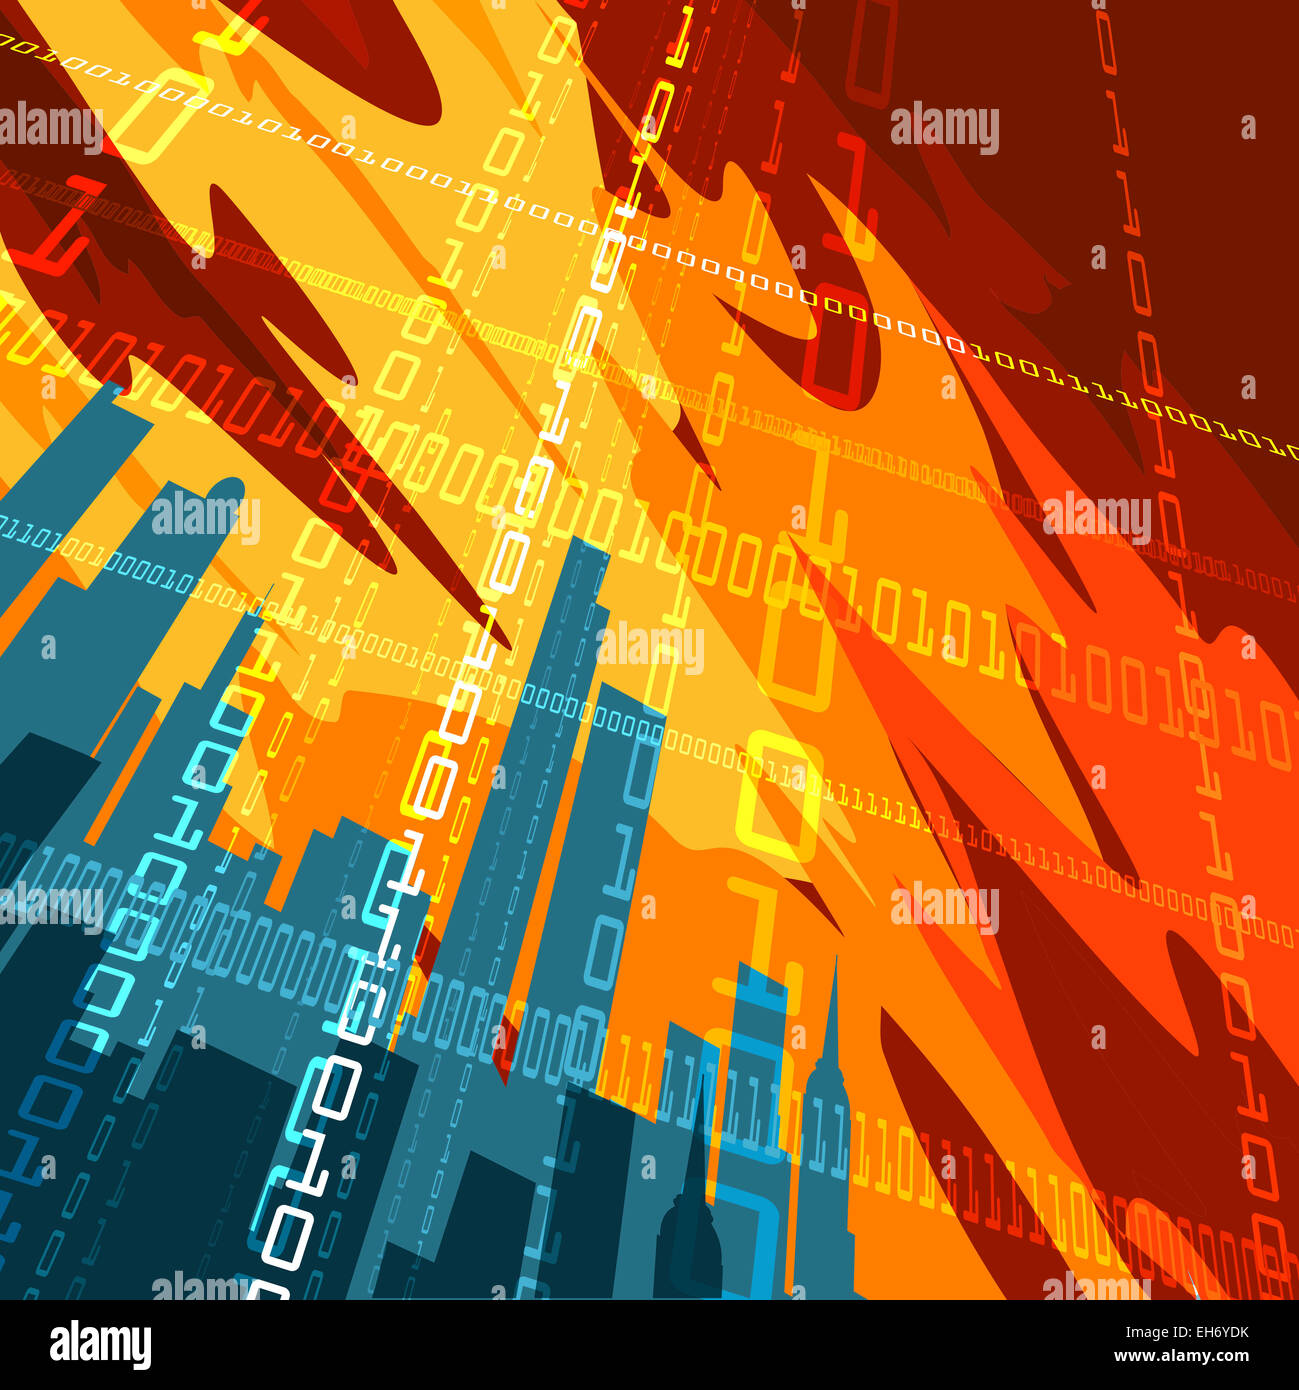 Abstract illustration of city skyscrapers and binary code lines against red skies drawn in placard style Stock Photo